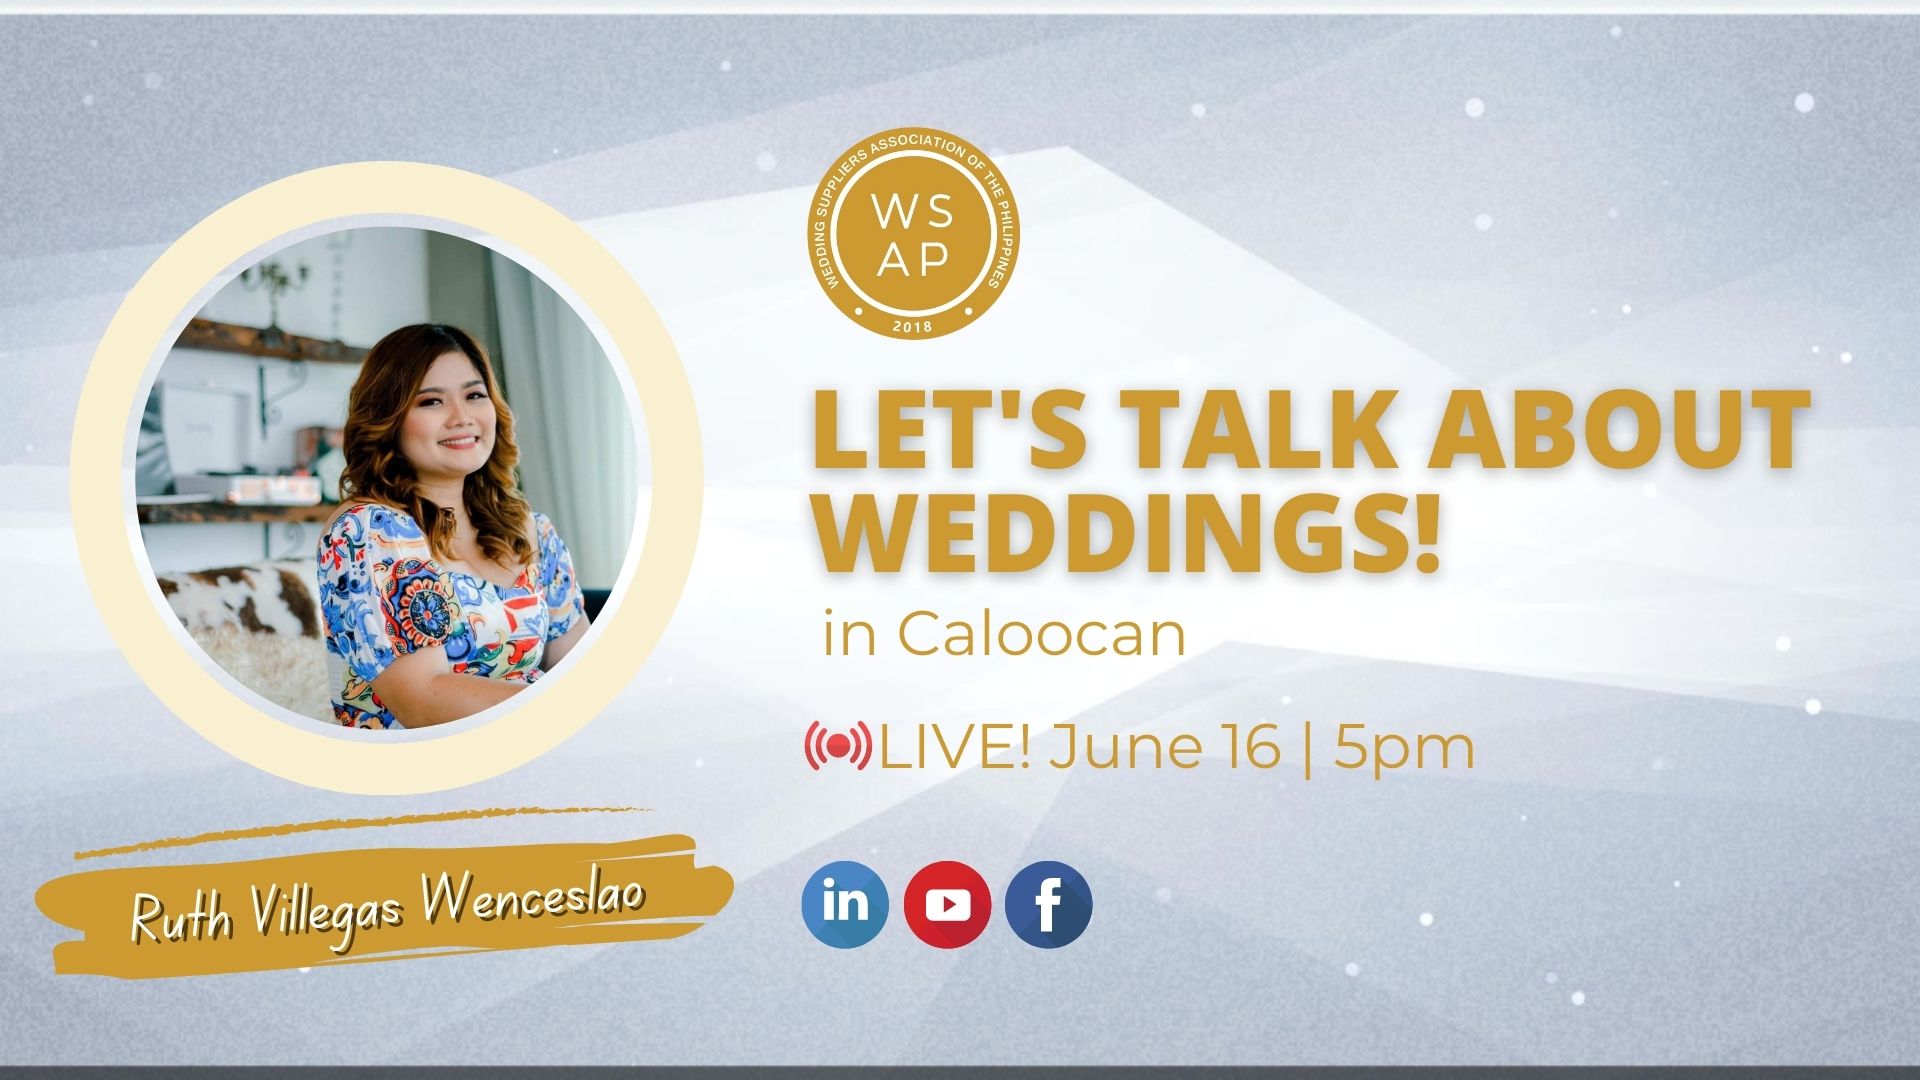 Let's Talk About Weddings in Caloocan with Ruth Villegas Wenceslao